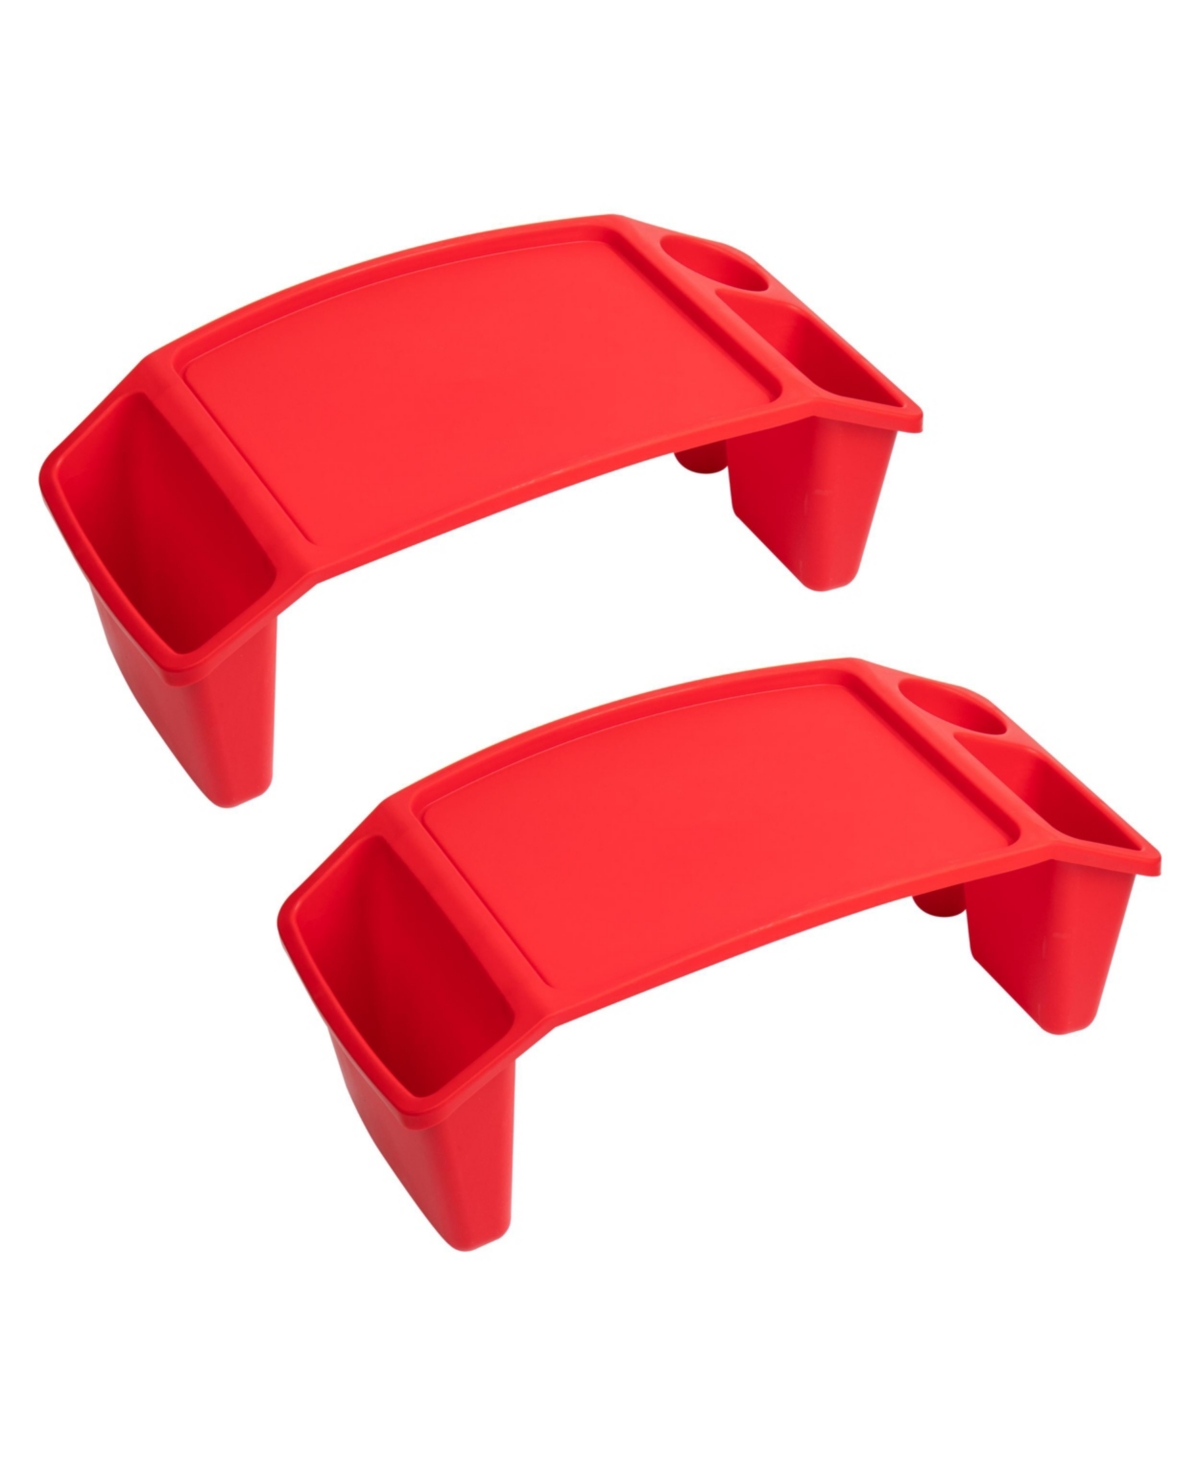 Sprout Collection, Portable Desk, Set of 2 - Red